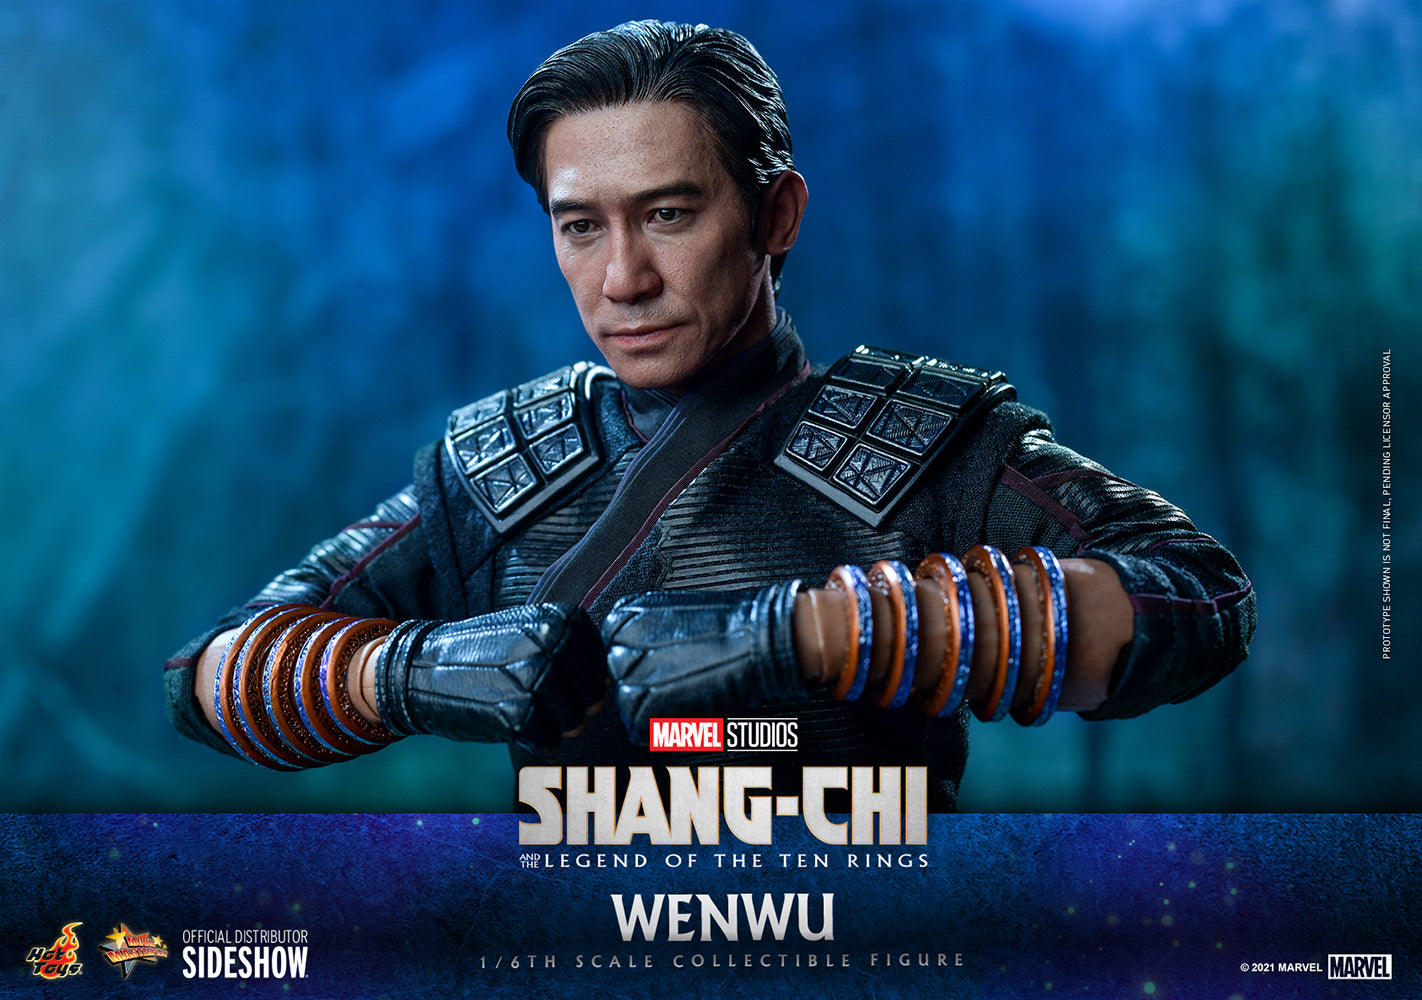 Load image into Gallery viewer, Wenwu (Shang-Chi Legend of the Ten Rings) Marvel 1:6 Scale Figure by Hot Toys
